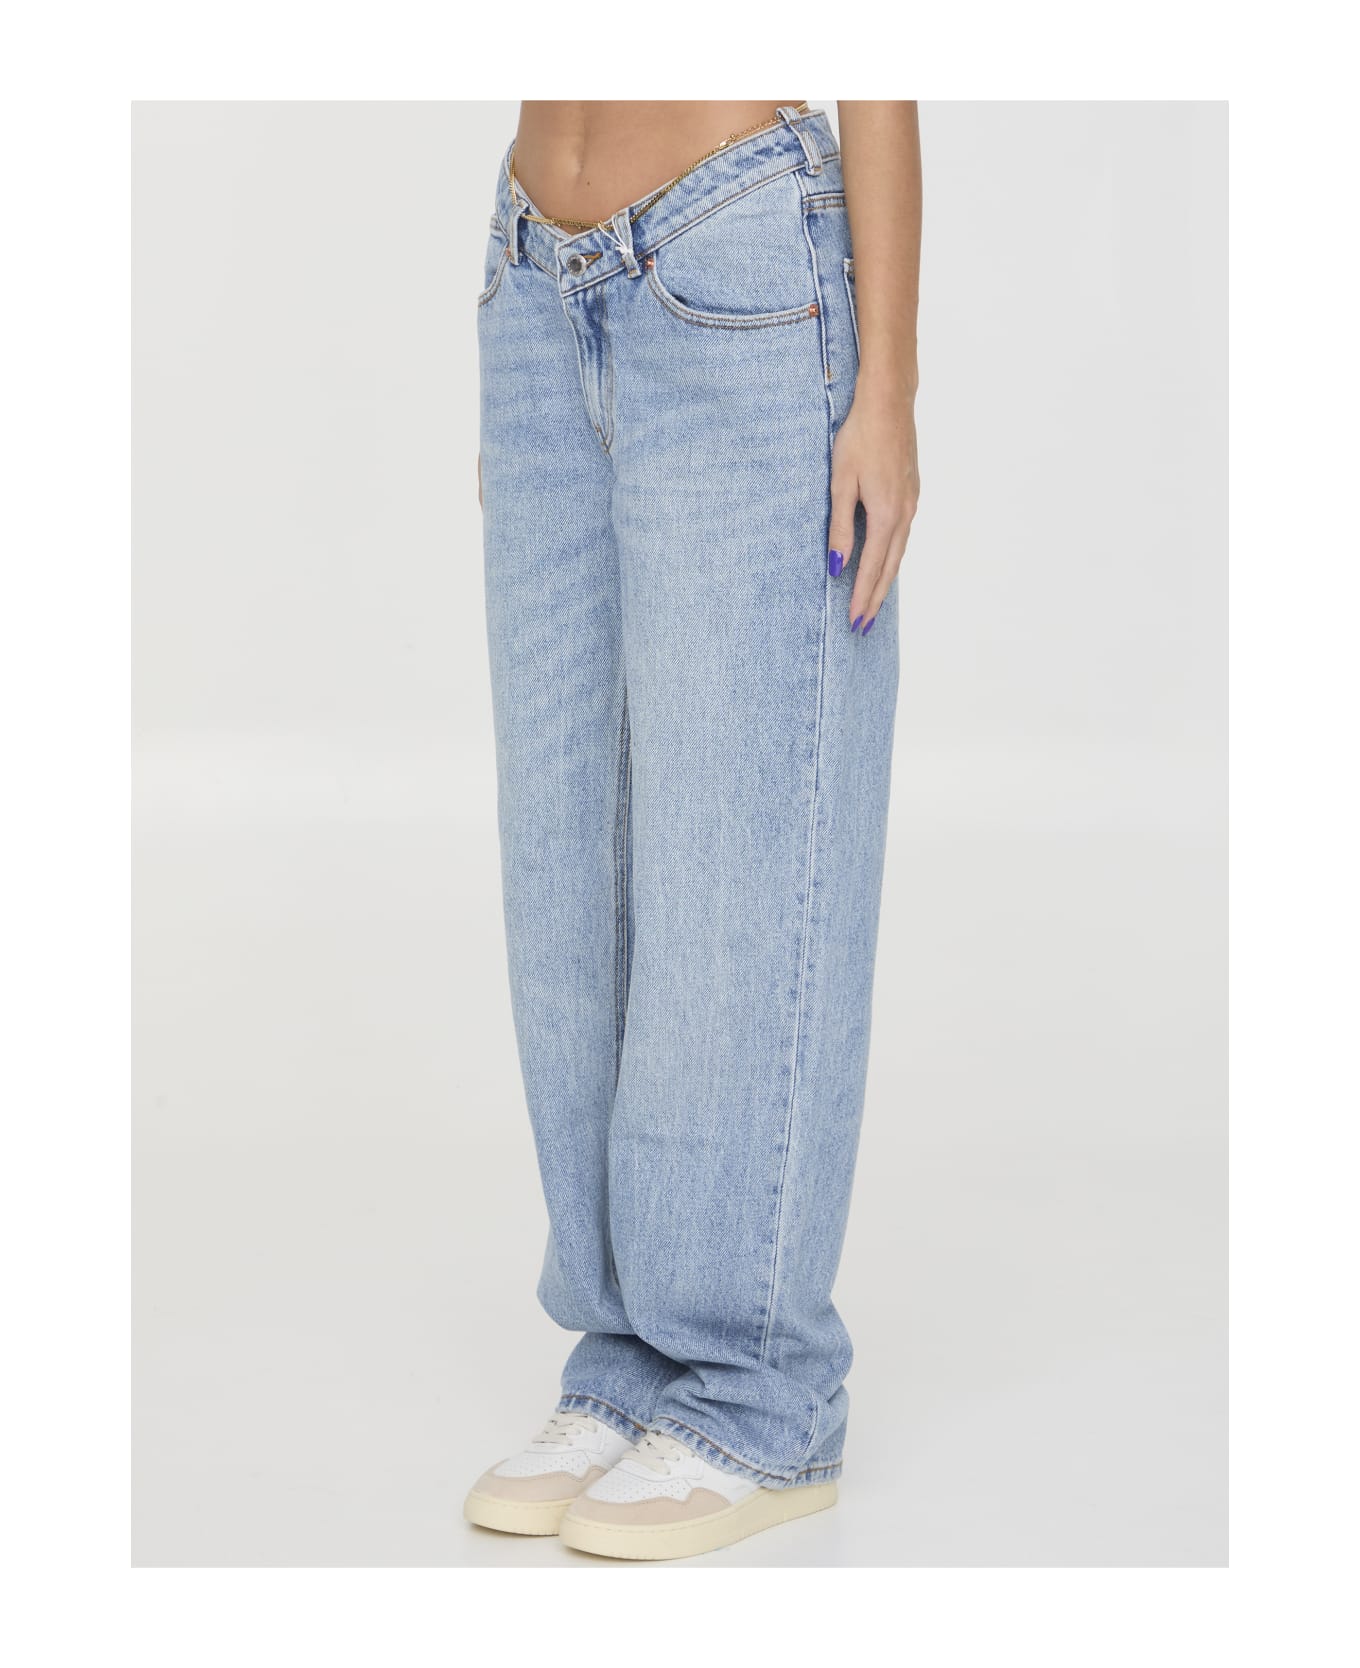 Alexander Wang Denim Jeans With Nameplate - BLUE